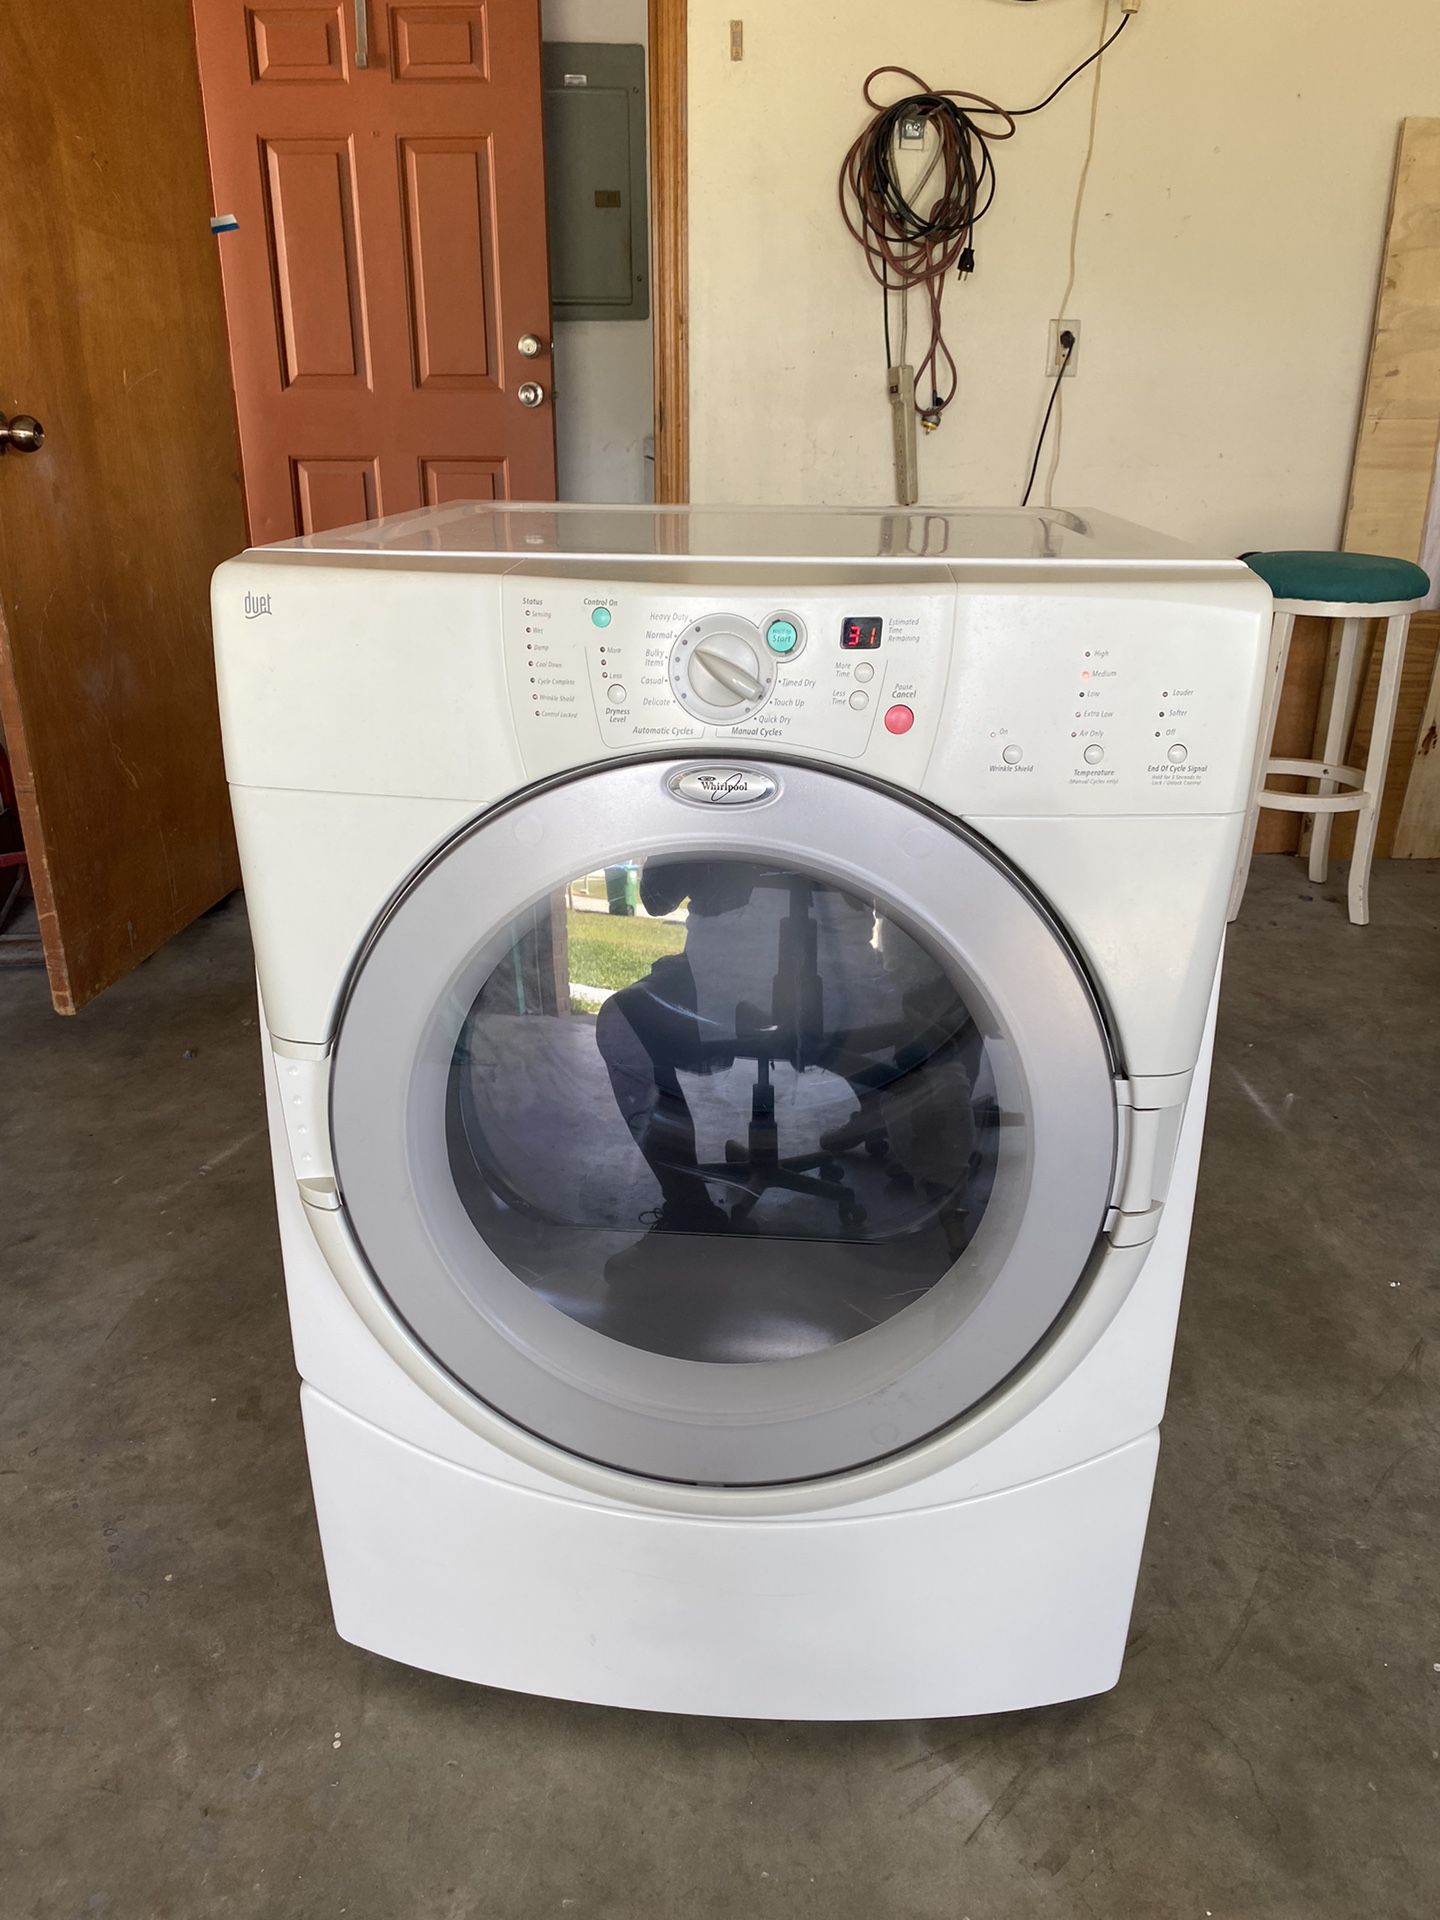 Whirlpool Duet Heavy Duty Electric Dryer Working Perfect Condition 